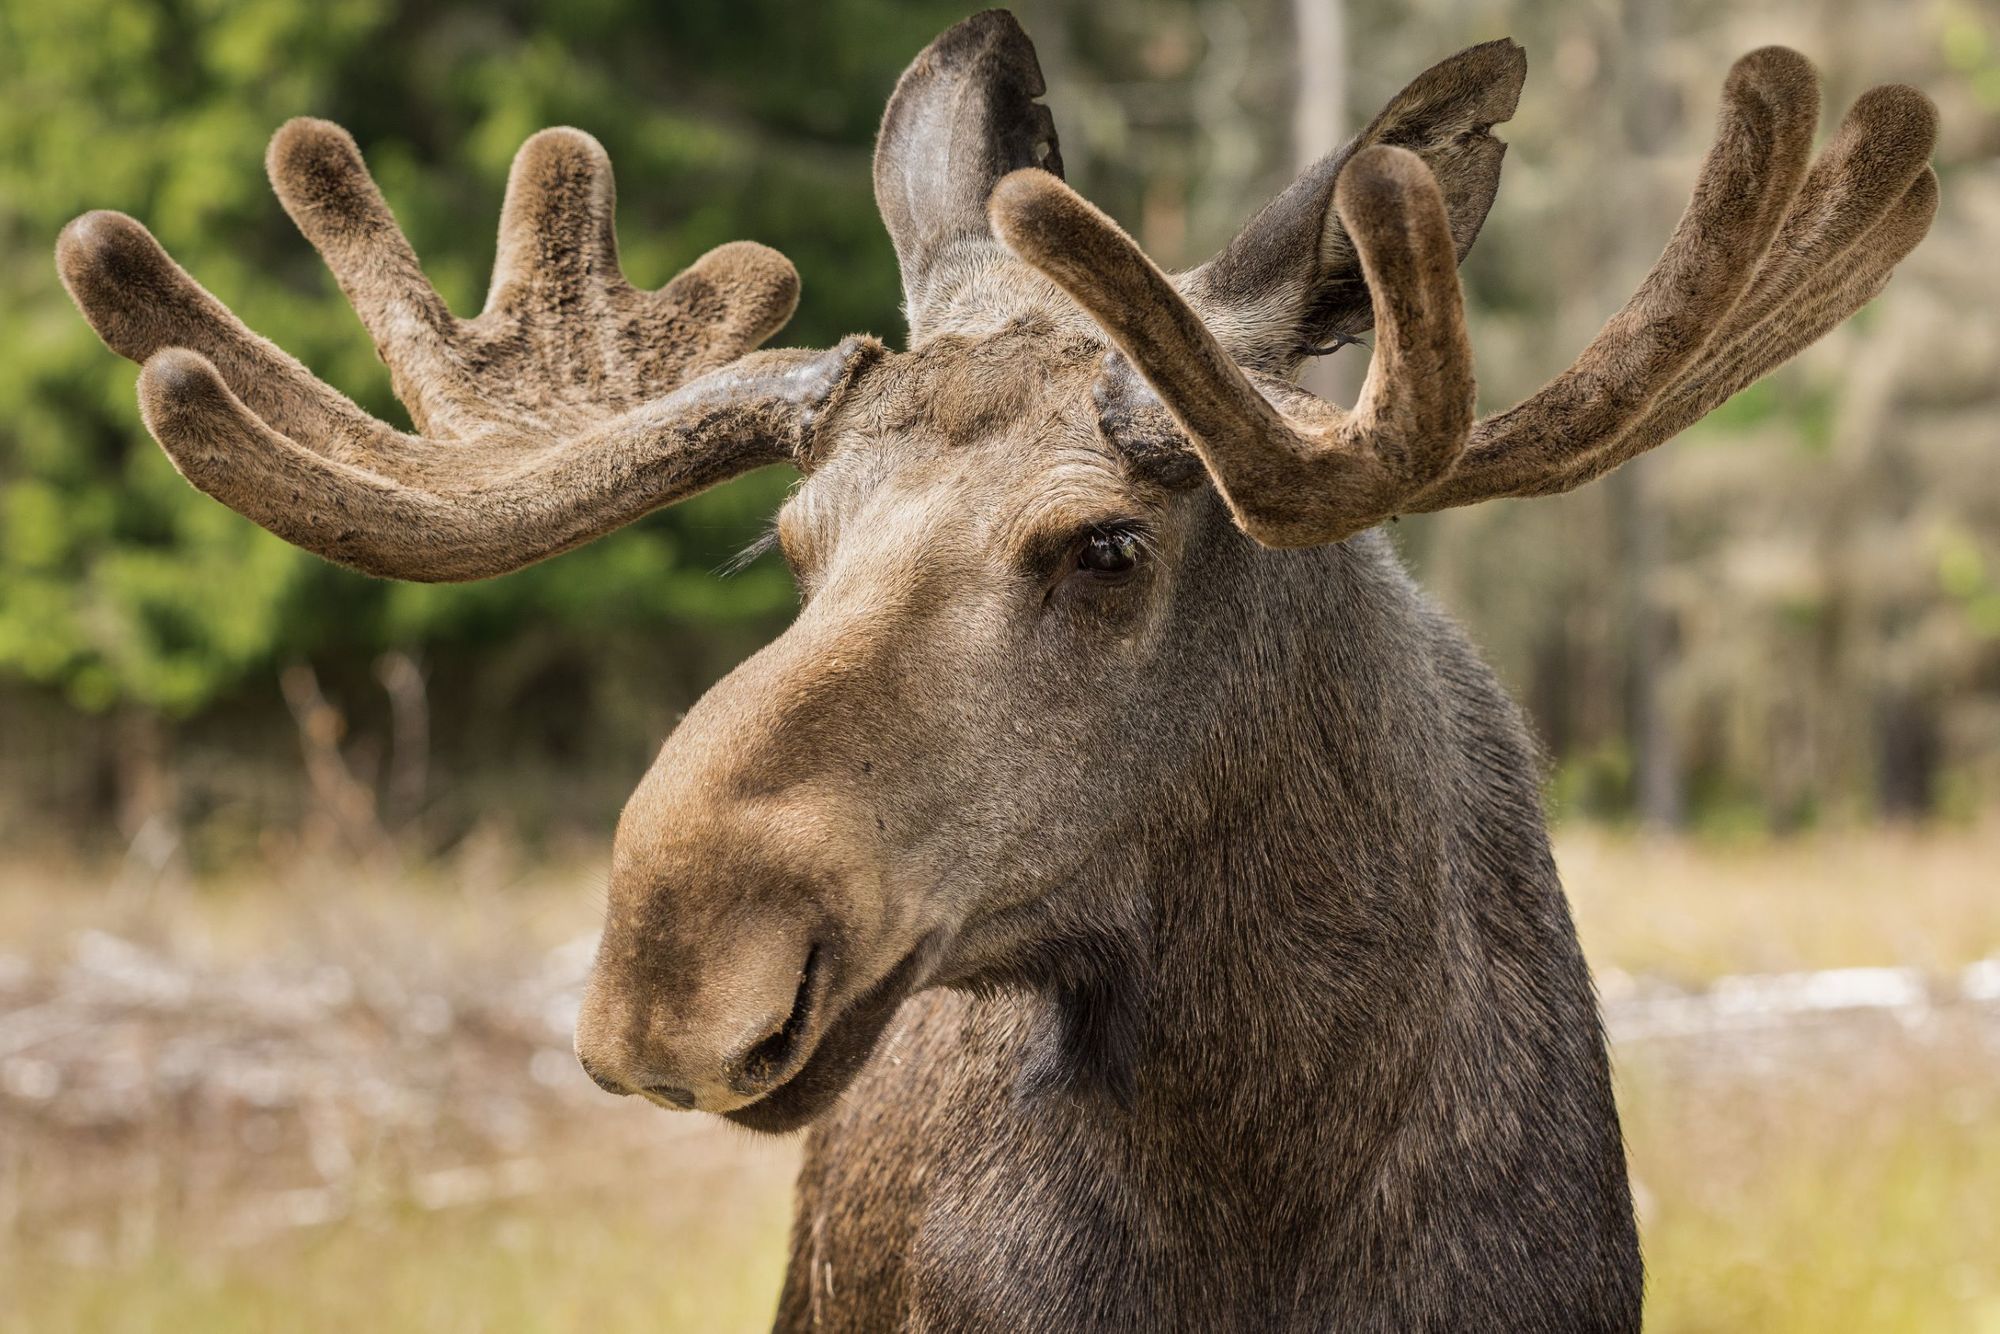 A moose poses for a new profile picture in the forests of Sweden. Photo: Getty